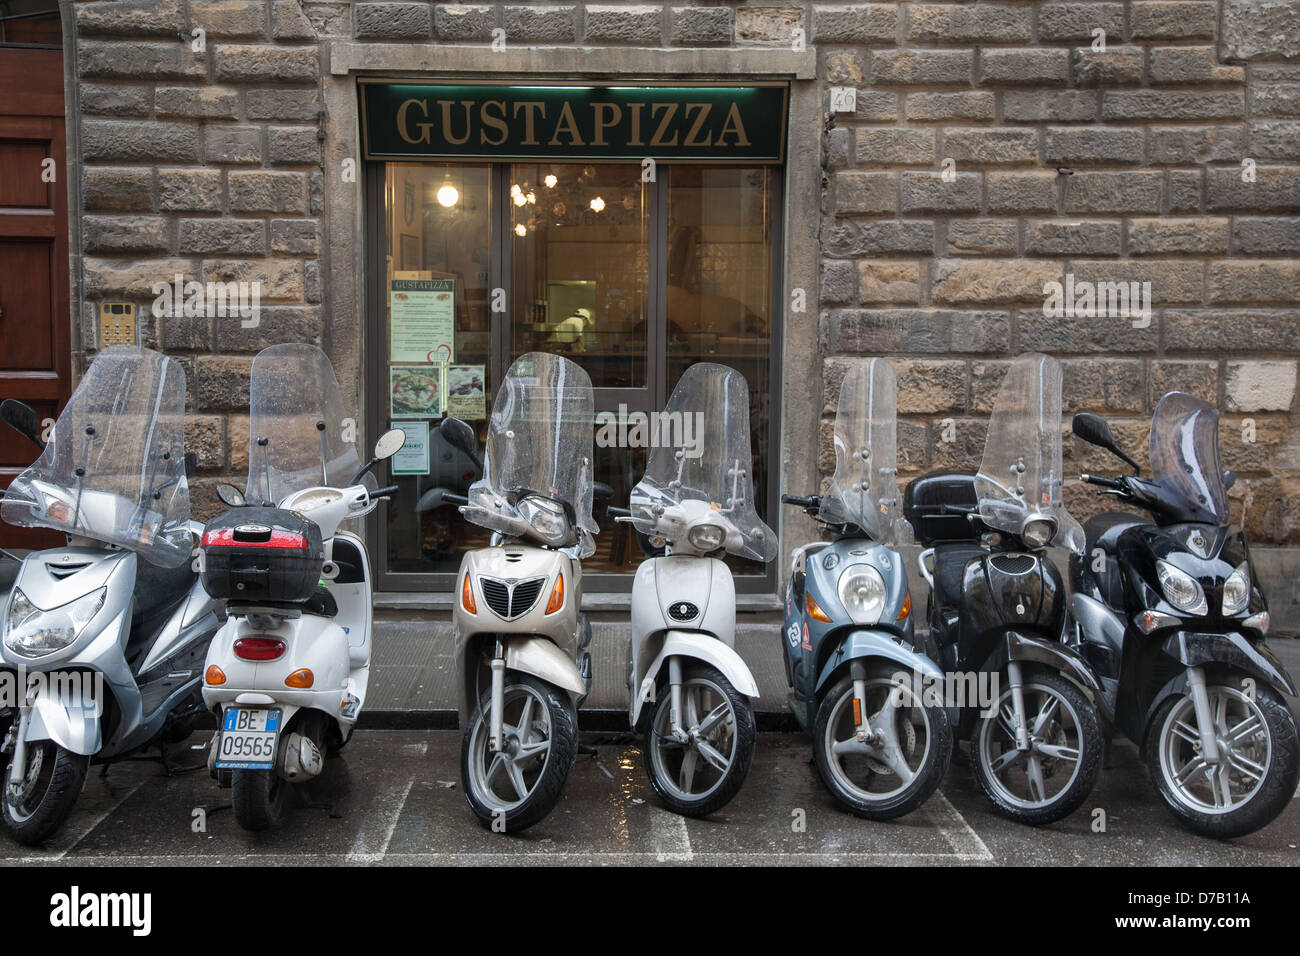 Gusta Pizza Restaurant and Motorbikes, Florence, Italy Stock Photo